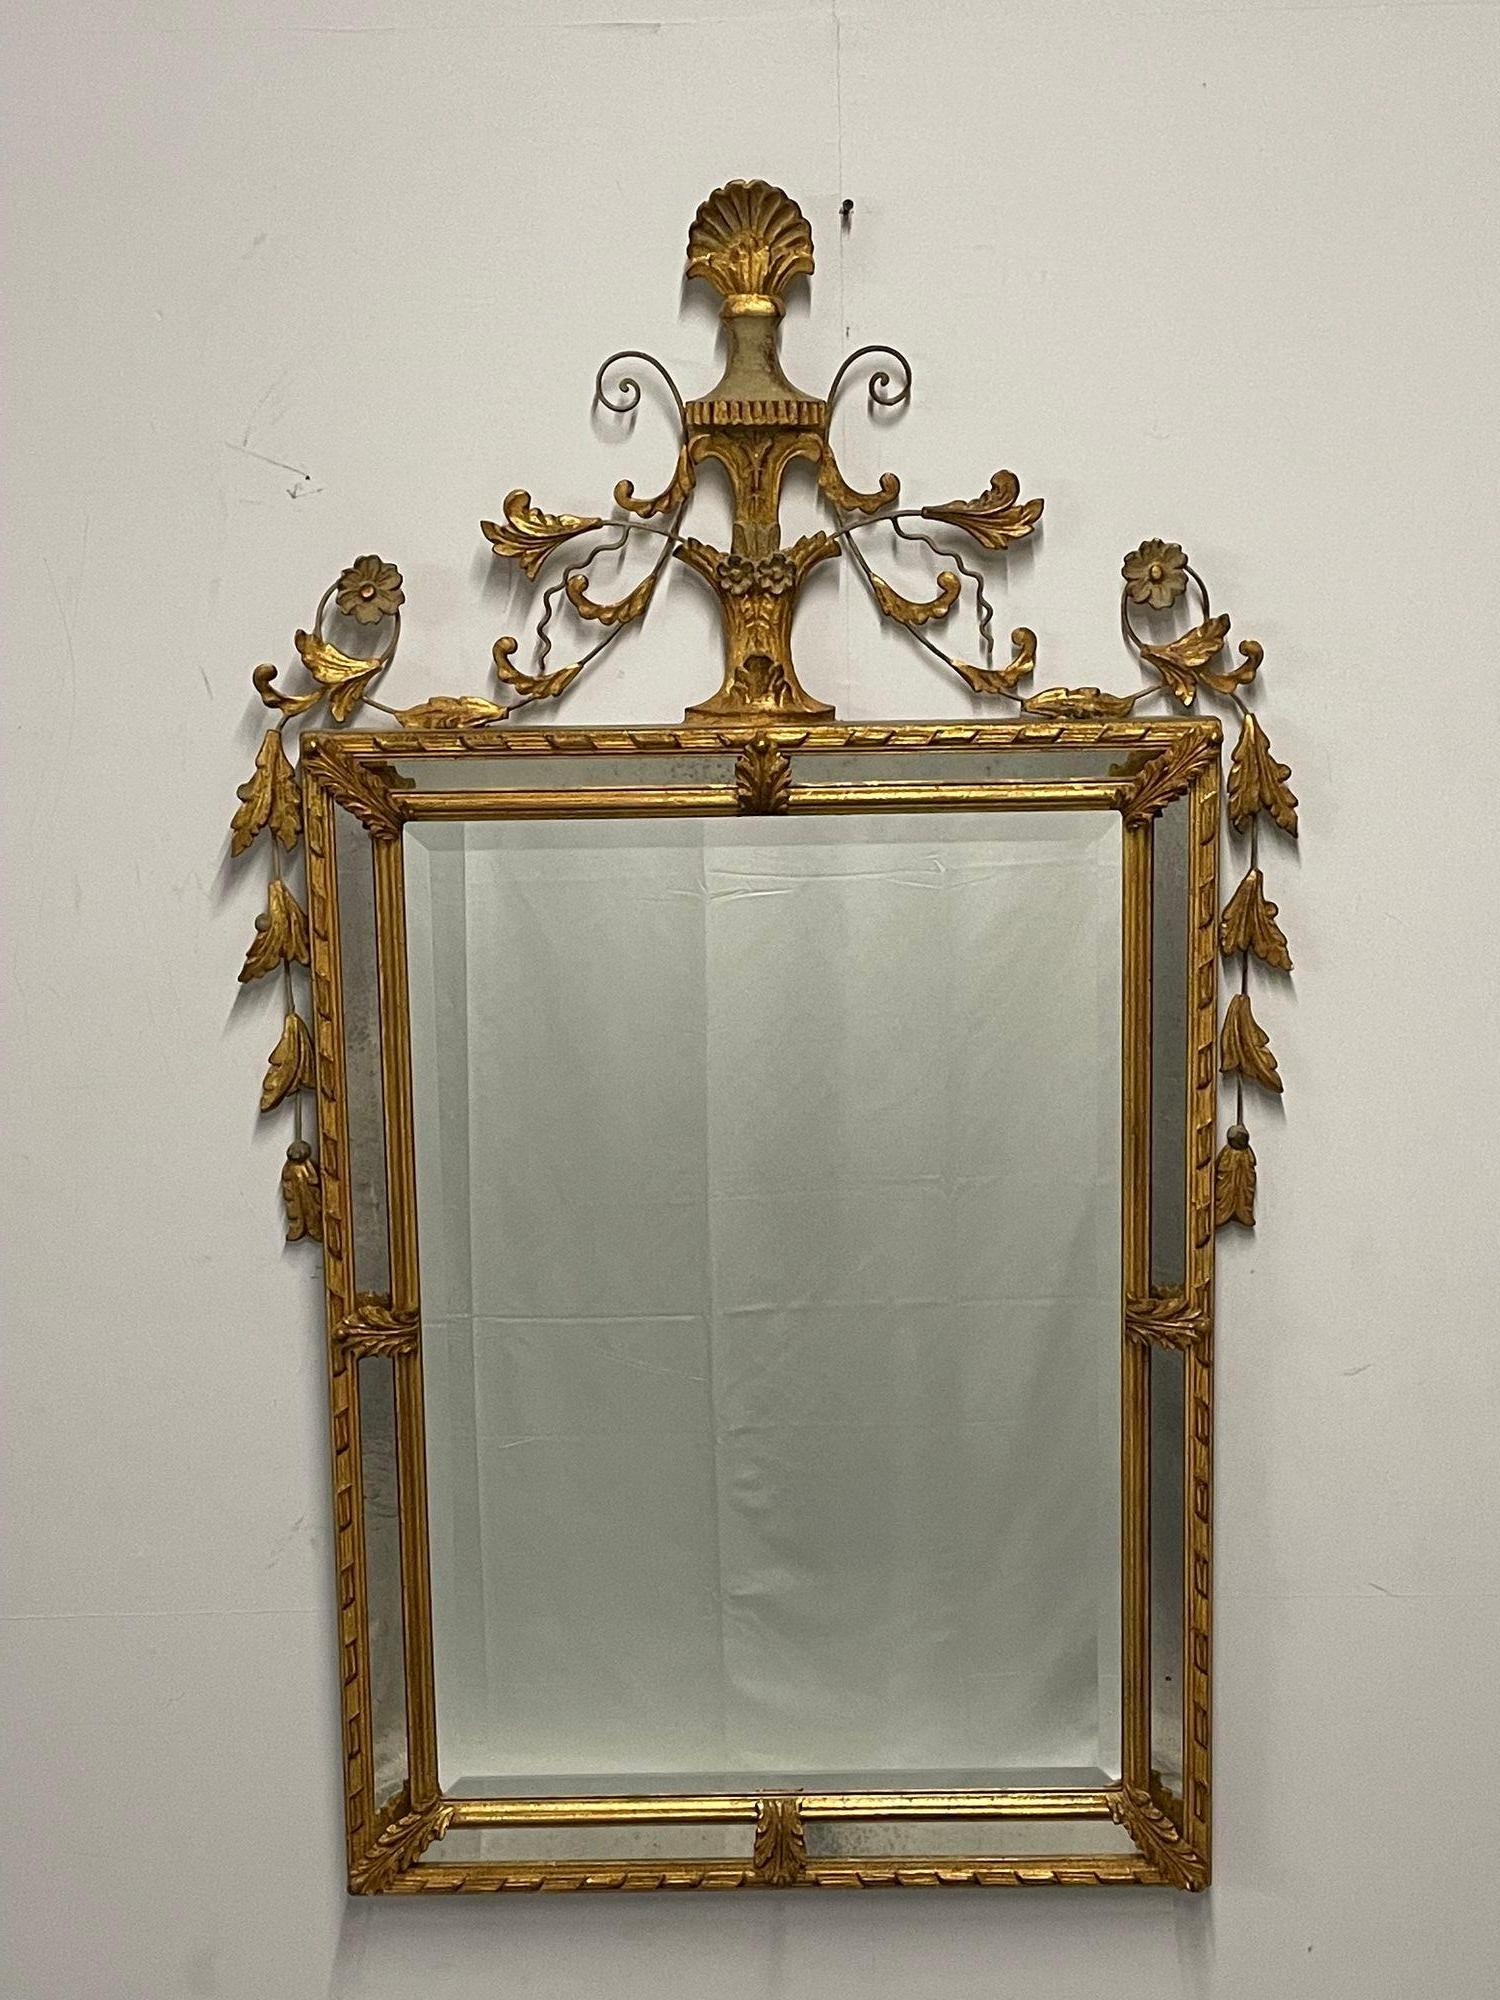 Adams Style Wall / Console / Pier Mirror, Giltwood, Floral Motif
Most likely Freidman Brothers. This fine decorative wall or console mirror is reminiscent of the Adams era. Having a clean center mirror panel flanked by clay under gilt design with